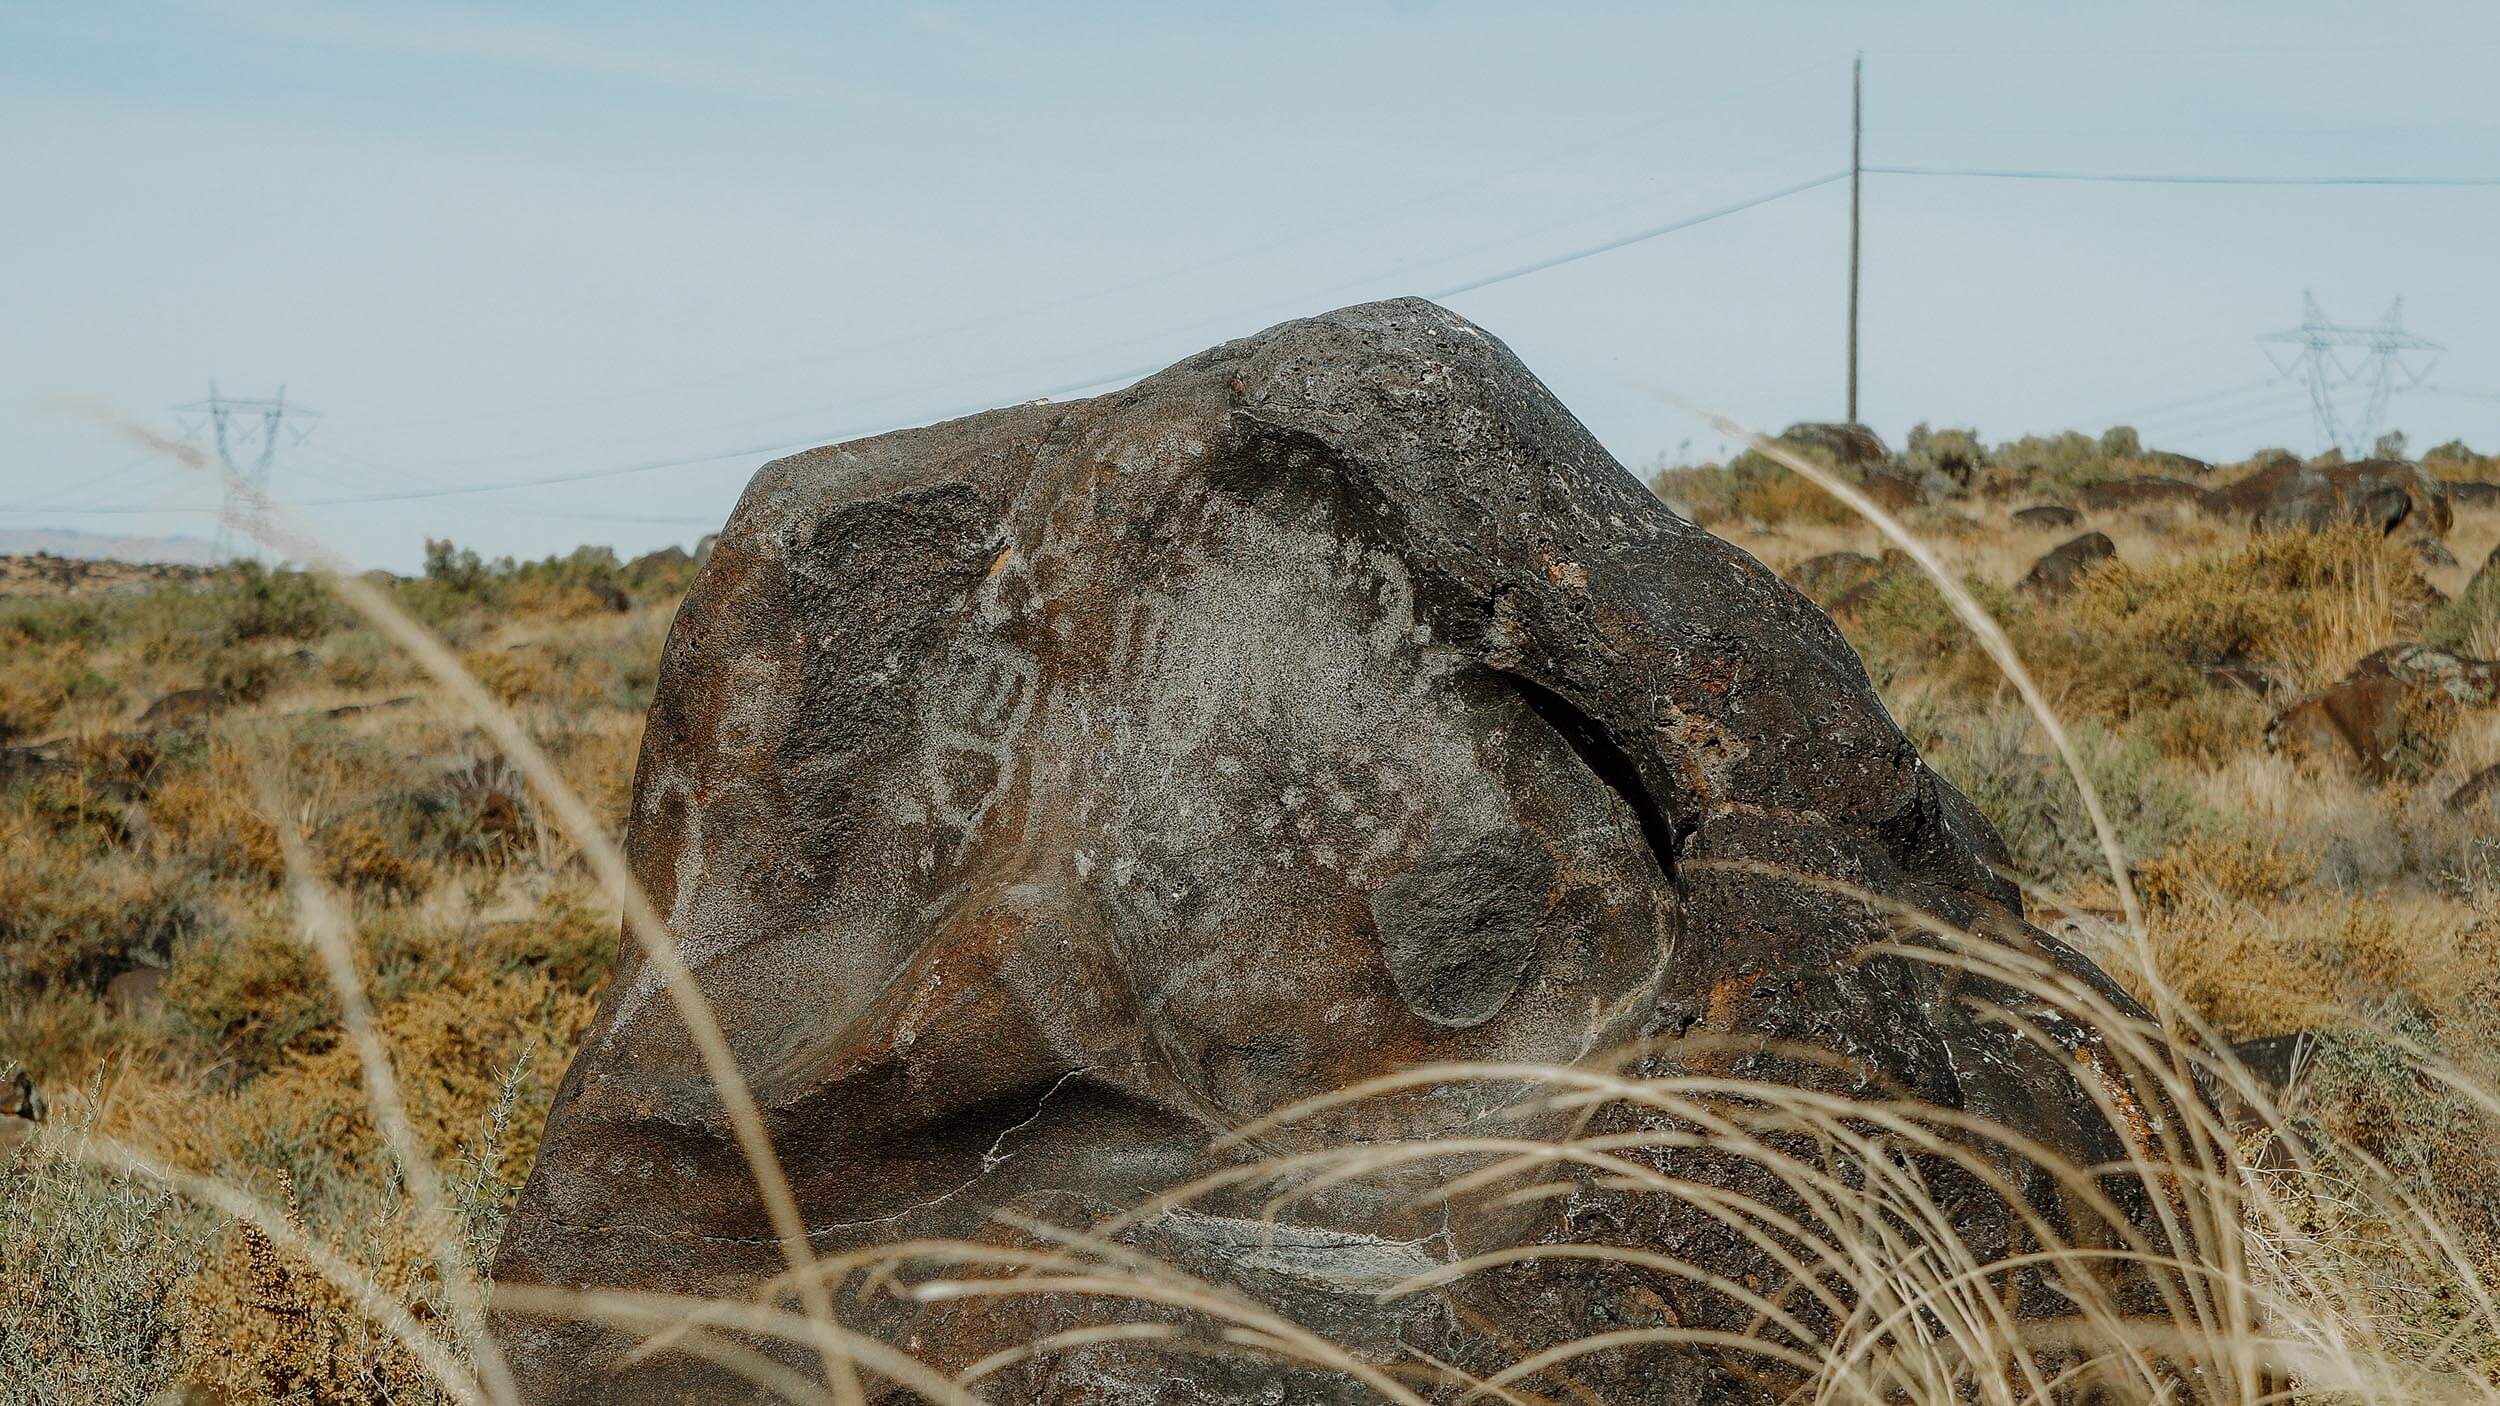 a large rock covered in petroglyphs surrounded by a desert landscape